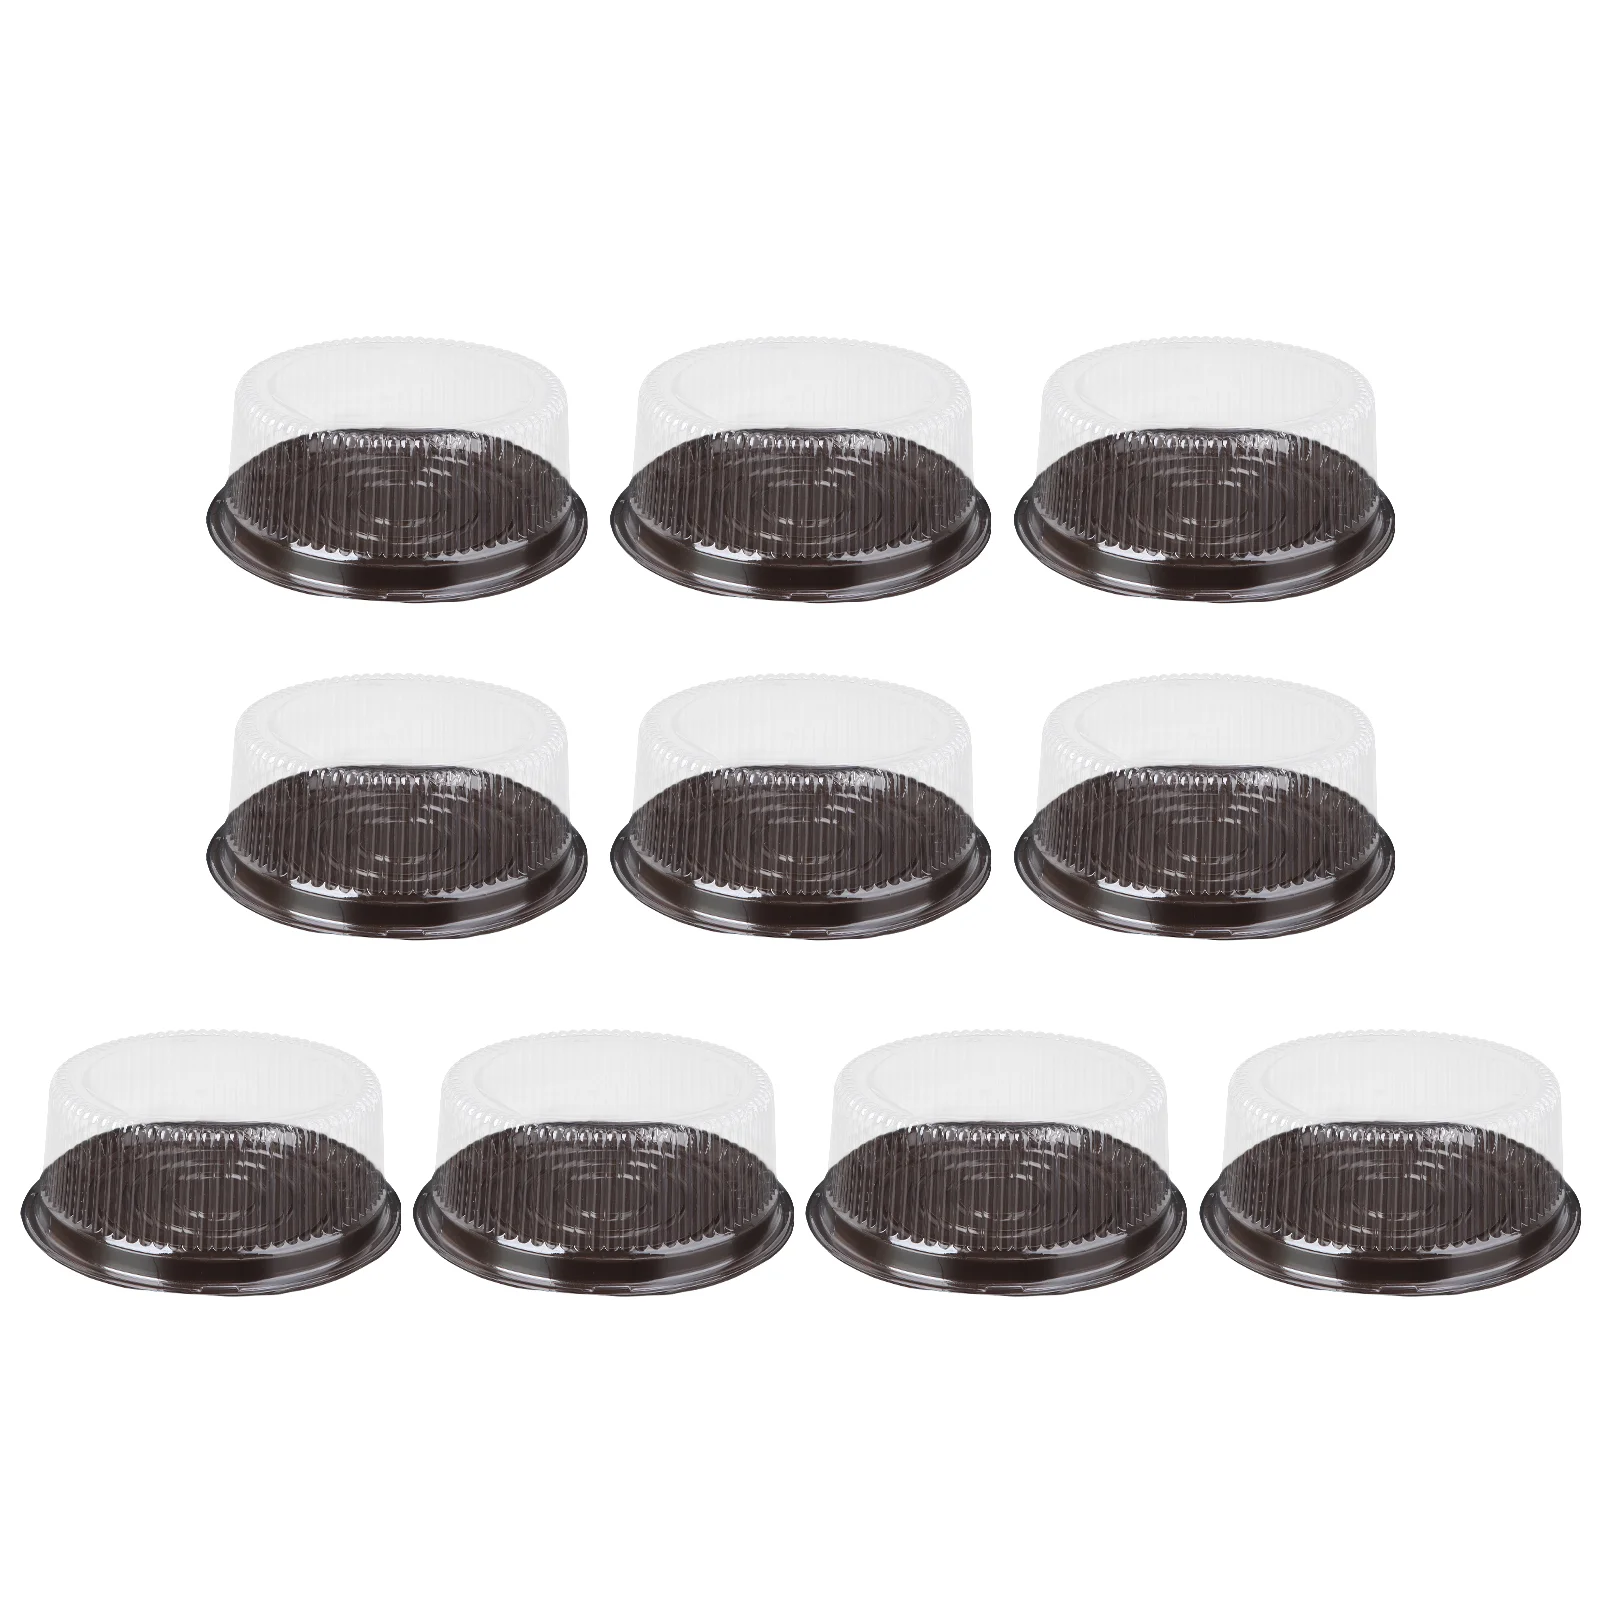 

Circular Cake Box Inch Transparent Plastic Cake Pastries Box Cupcake Muffin Dome Holders Cases Boxes Cups Blister Box